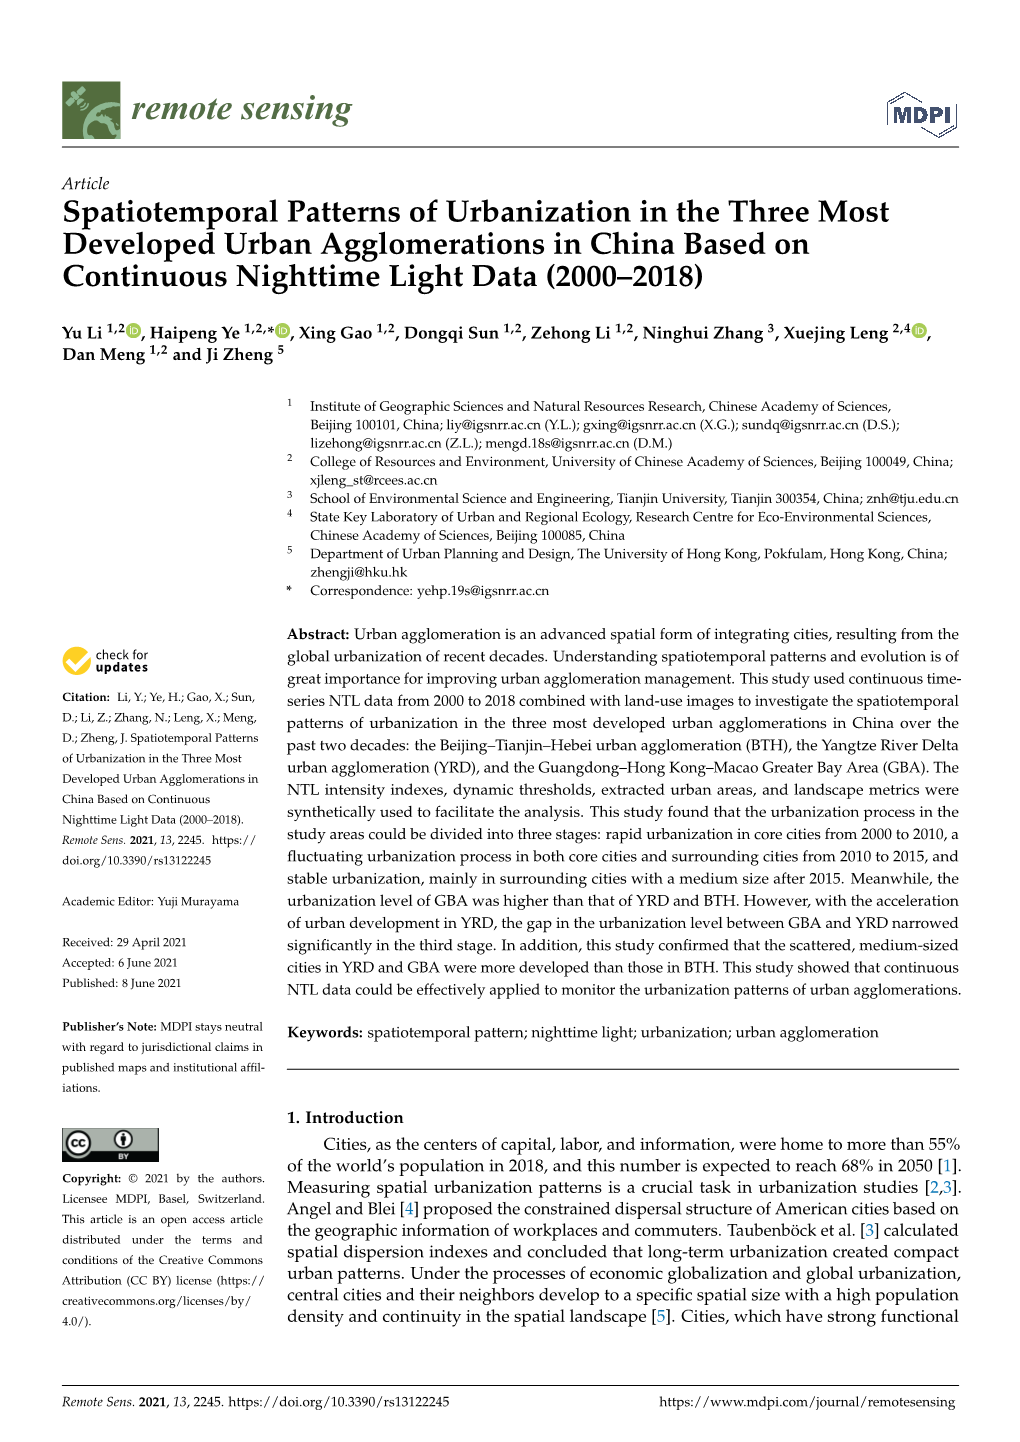 Spatiotemporal Patterns of Urbanization in the Three Most Developed Urban Agglomerations in China Based on Continuous Nighttime Light Data (2000–2018)